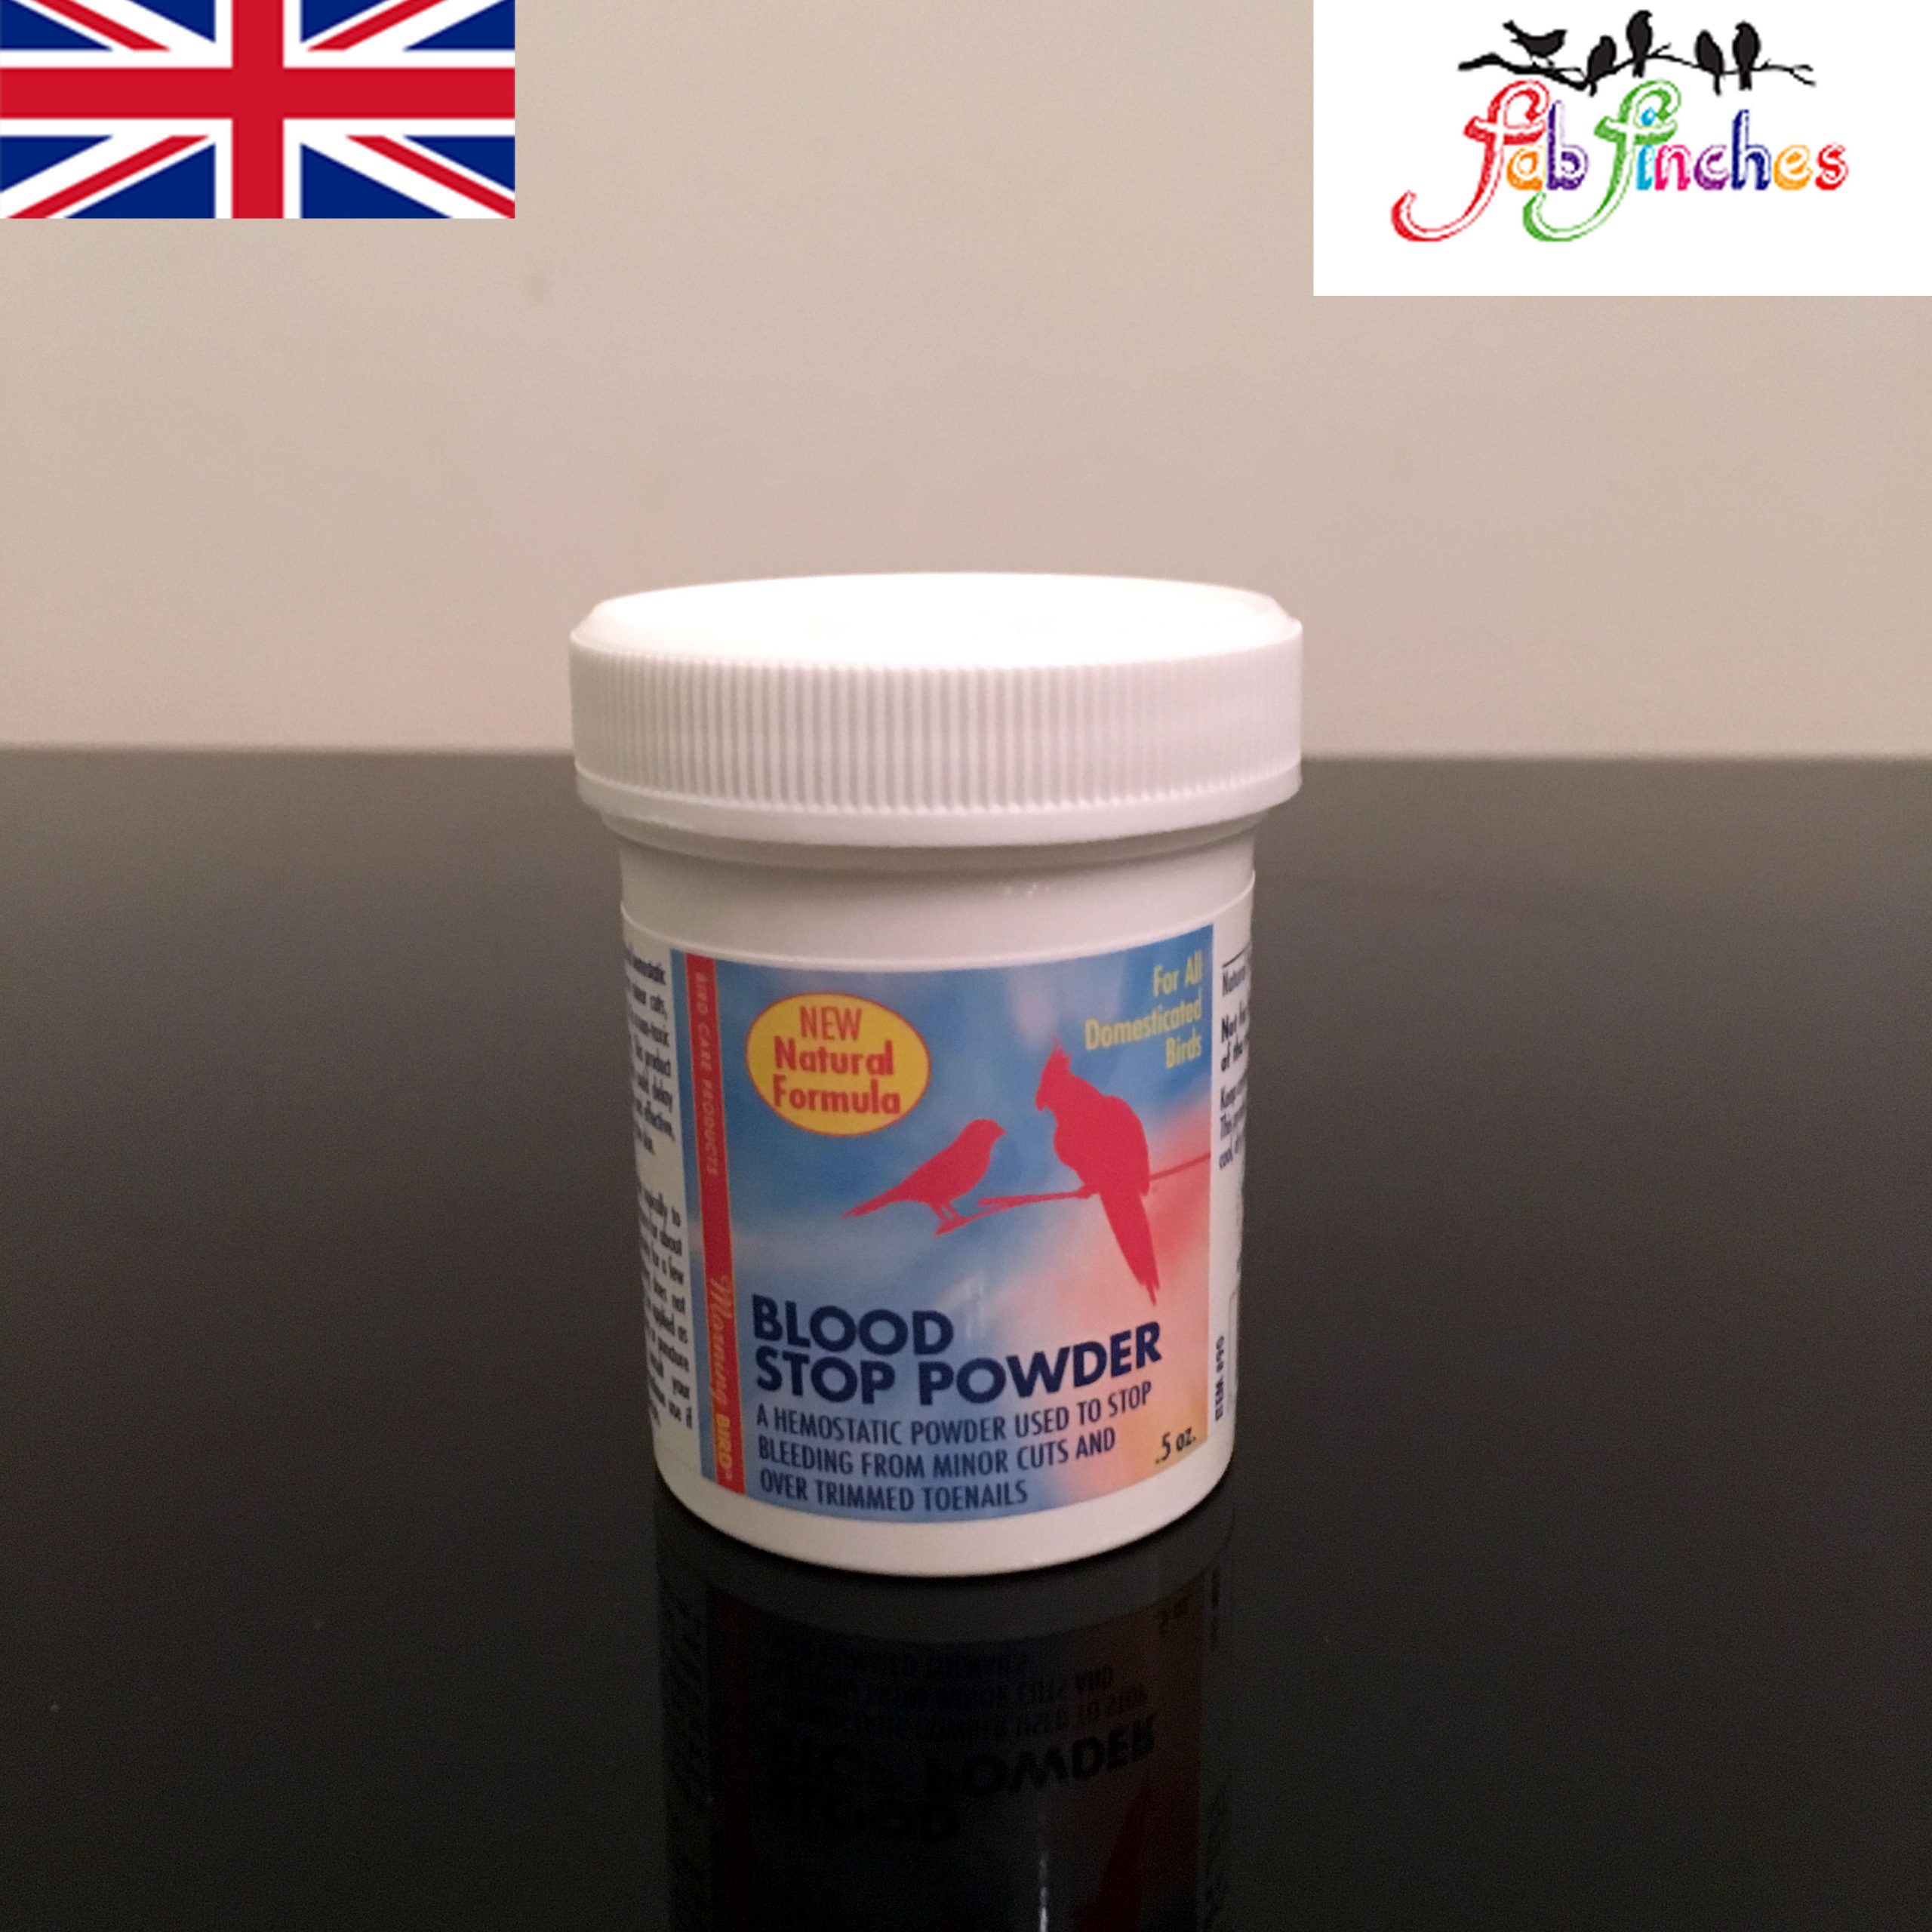 Morning Bird BLOOD STOP POWDER  for Minor cuts, wounds or over trimmed  nails - Fab Finches UK